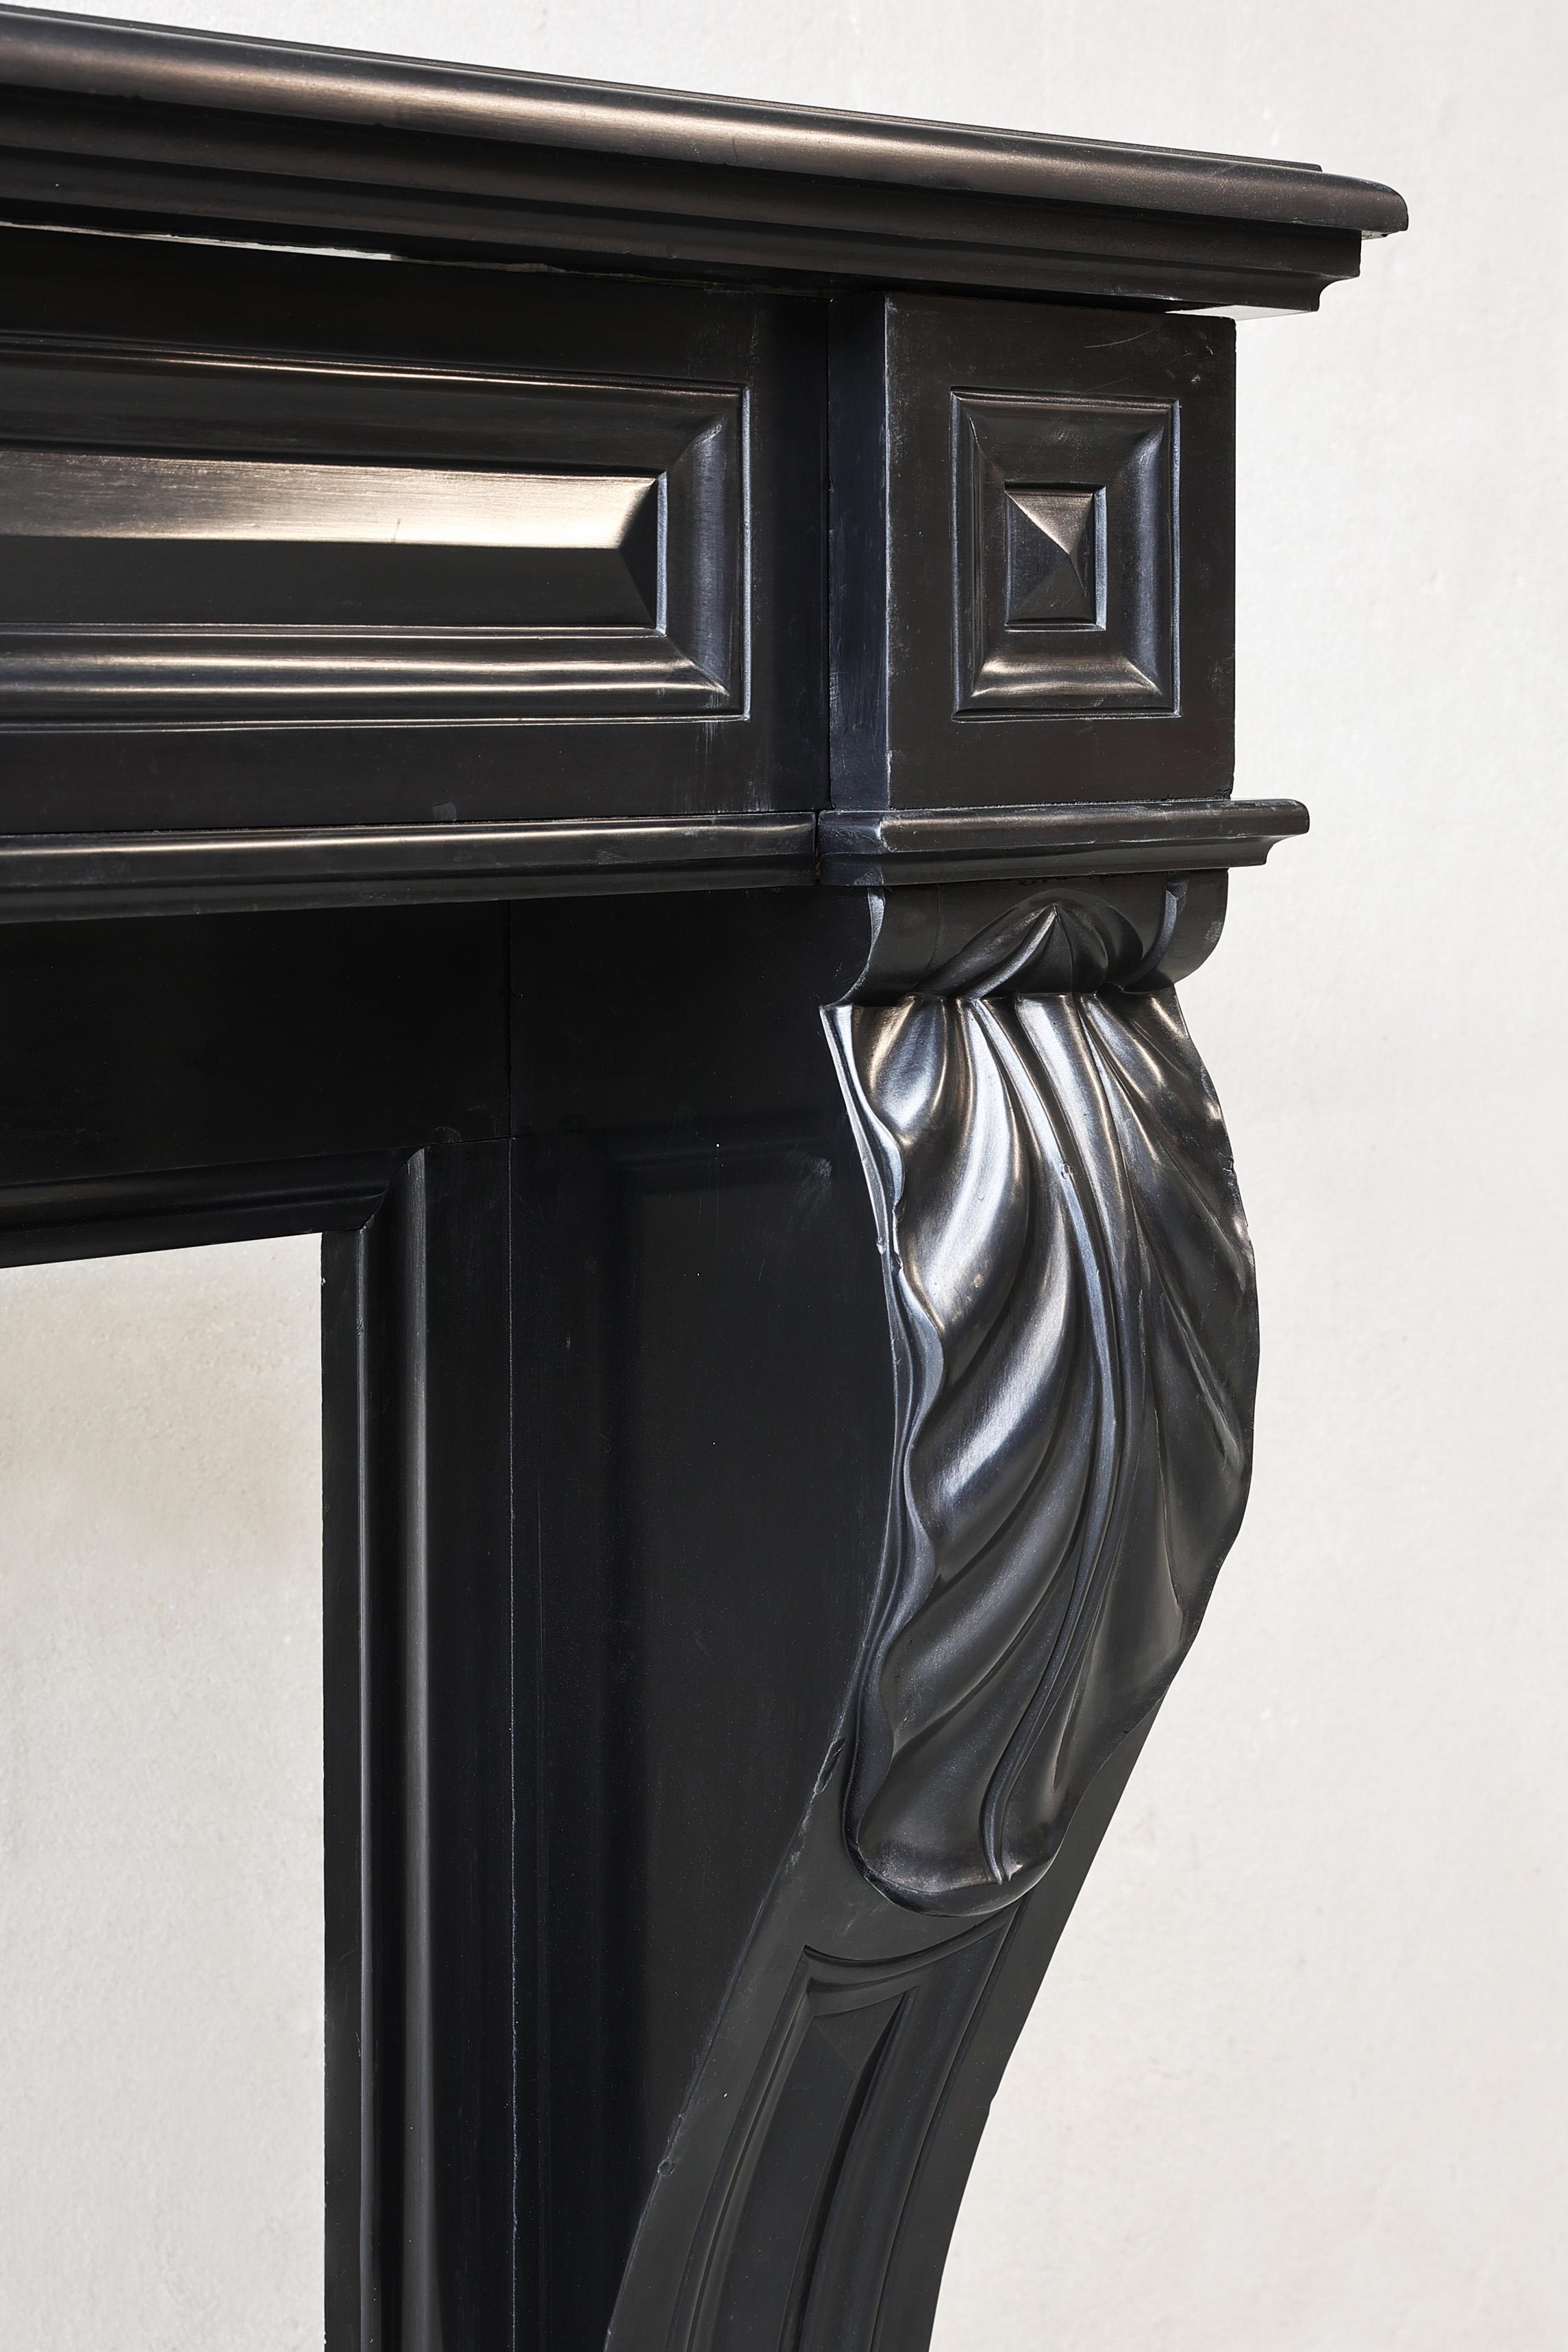 19th century fireplace in style of Louis XVI of Noir de Mazy marble For Sale 3